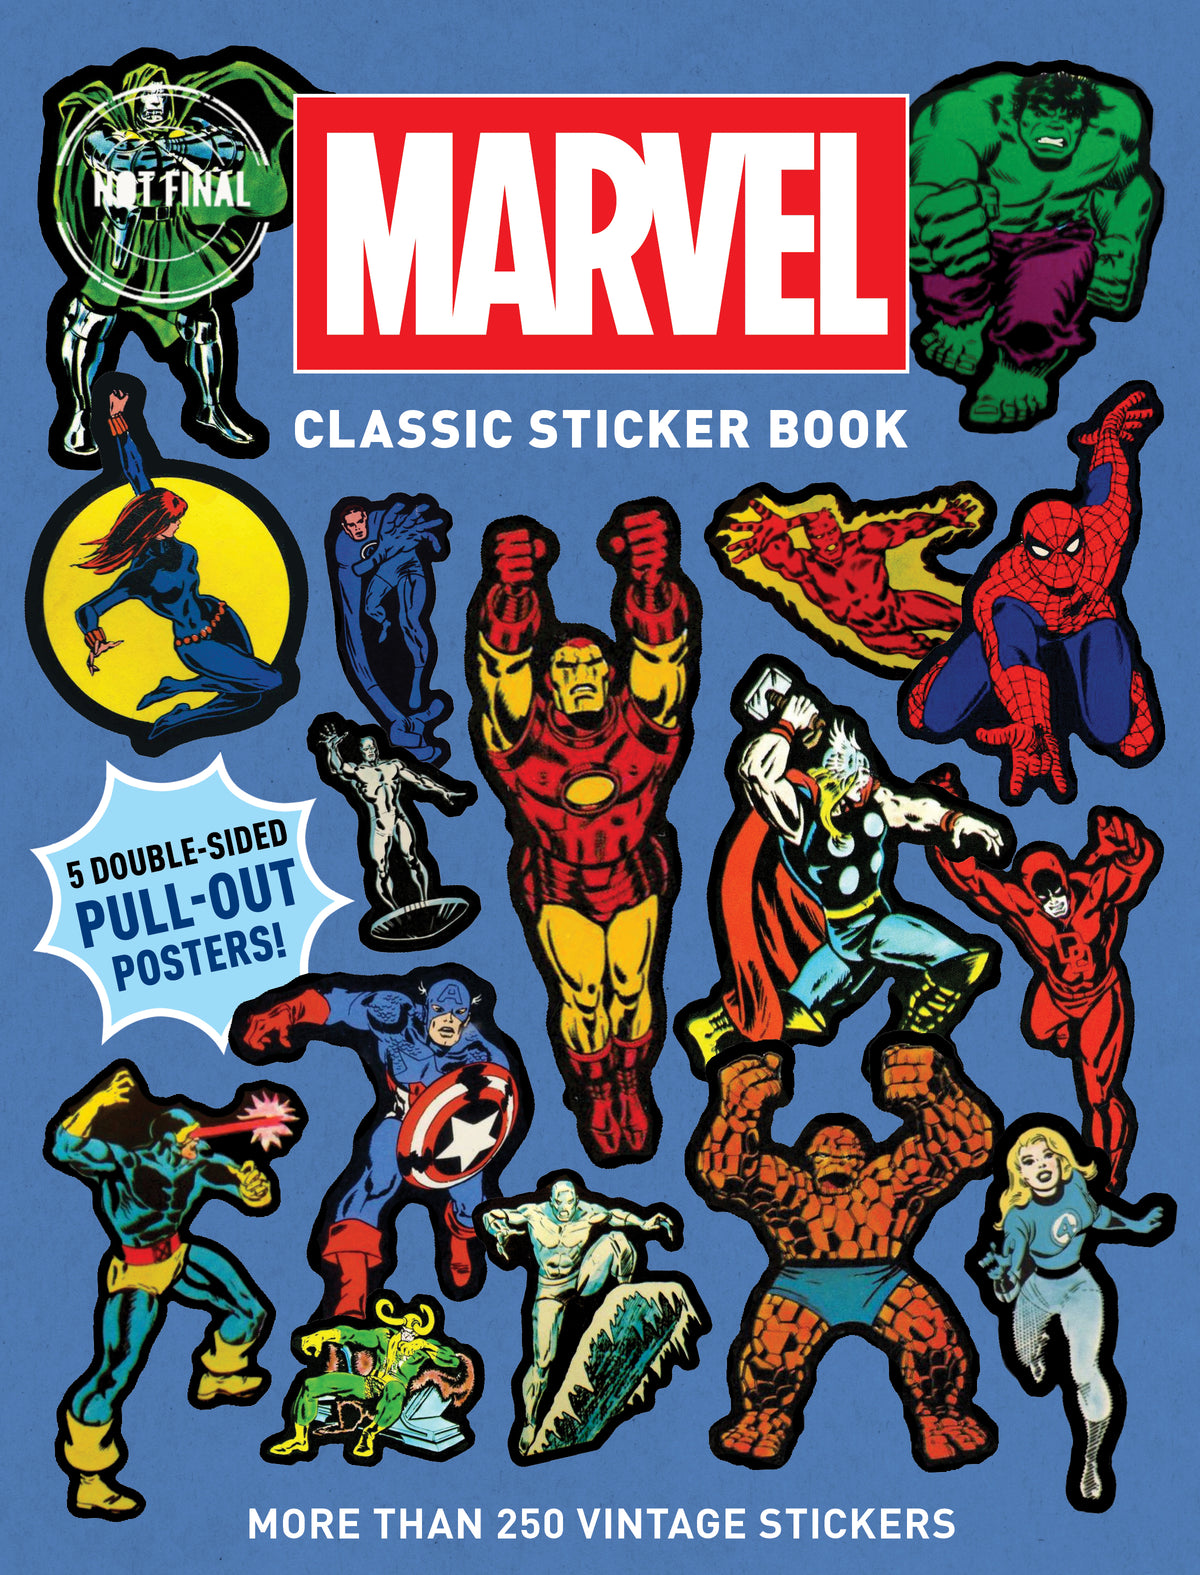 Marvel Classic Sticker Book– Abrams & Chronicle Books